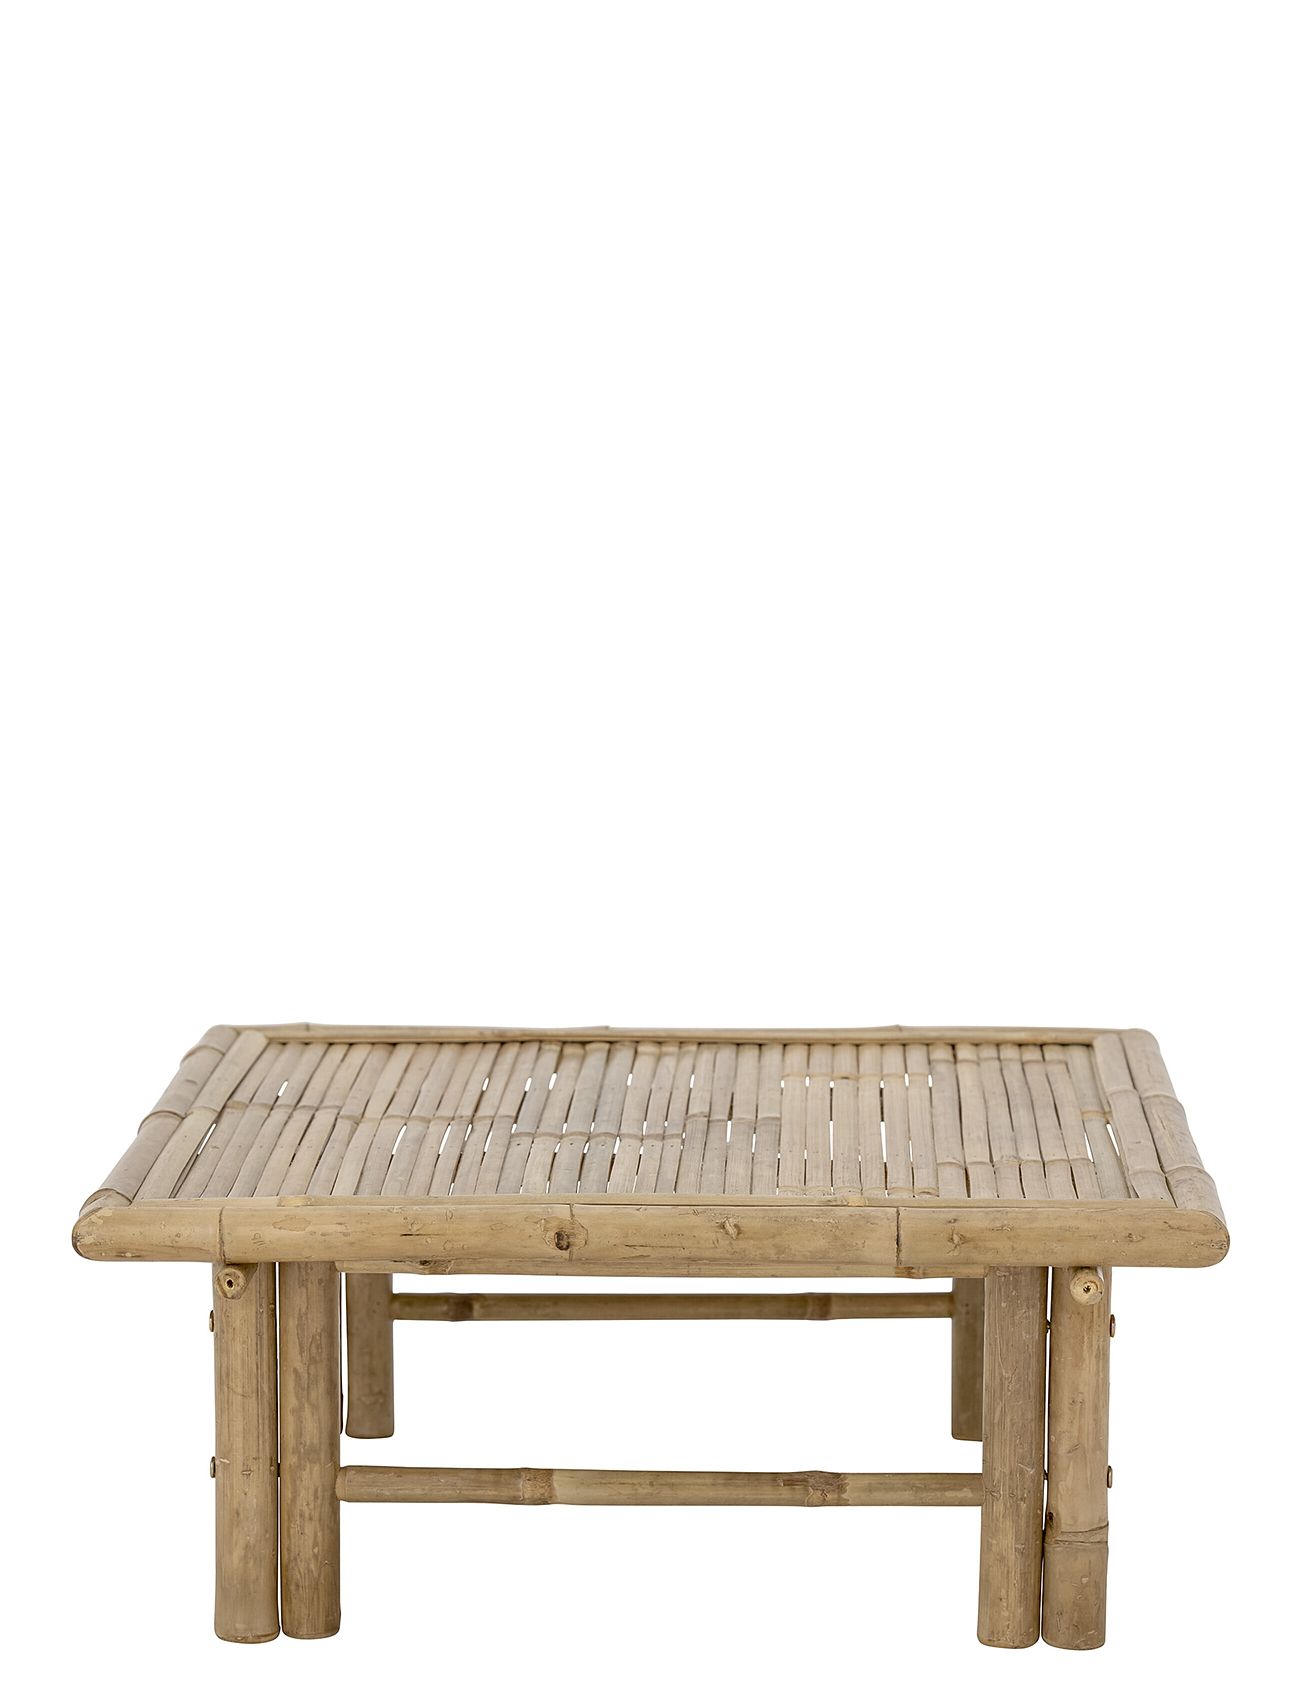 Korfu Sofabord, Natur, Bambus Home Outdoor Environment Outdoor Tables Beige Bloomingville